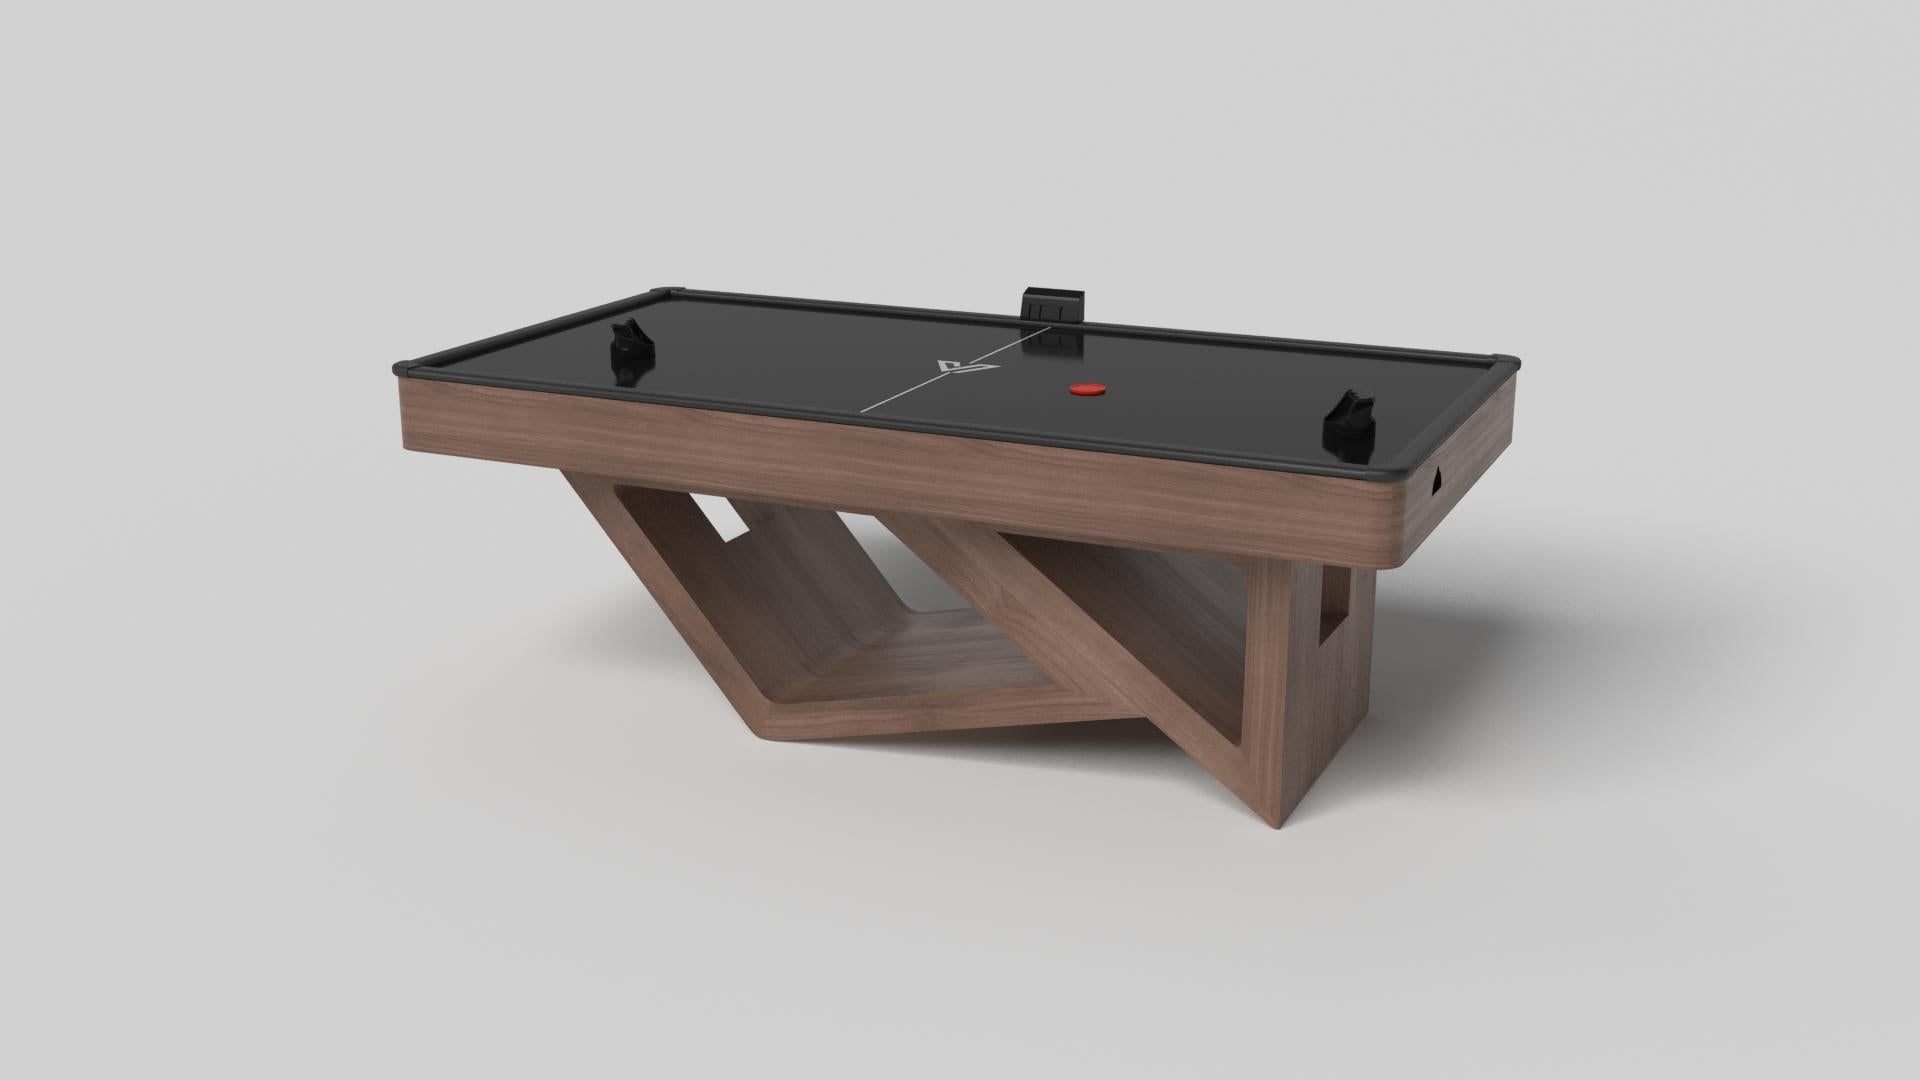 Drawing inspiration from the beauty of geometric forms, the Rumba air hockey table in brushed aluminum is characterized by a series of hollow and solid shapes that form an offset asymmetric base. Accented with a black top for professional game play,